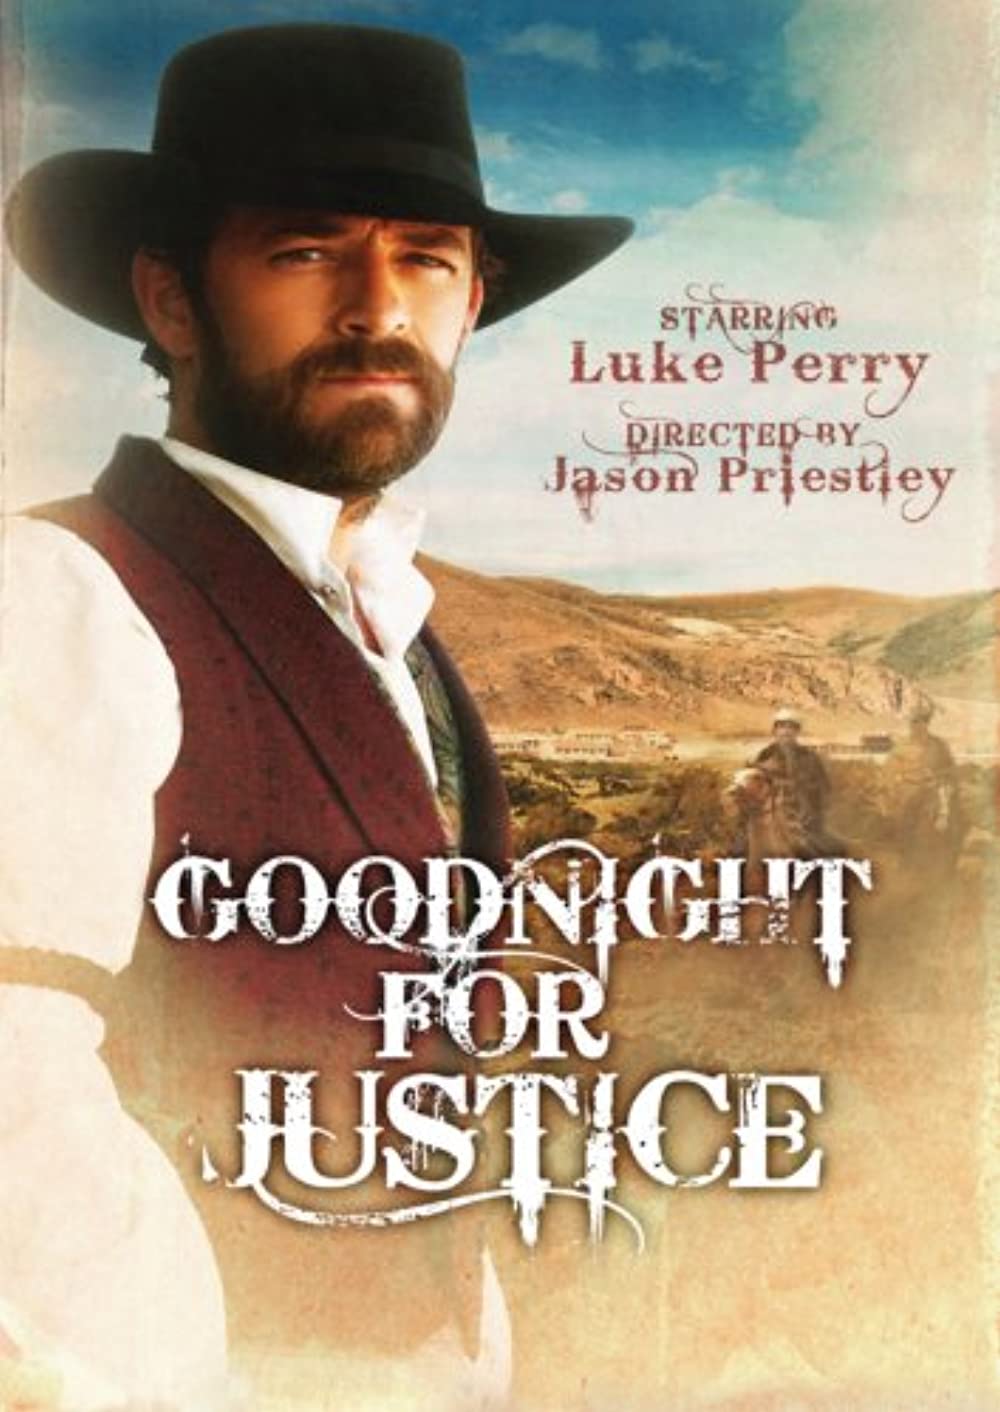 Download Goodnight for Justice Movie | Goodnight For Justice Hd